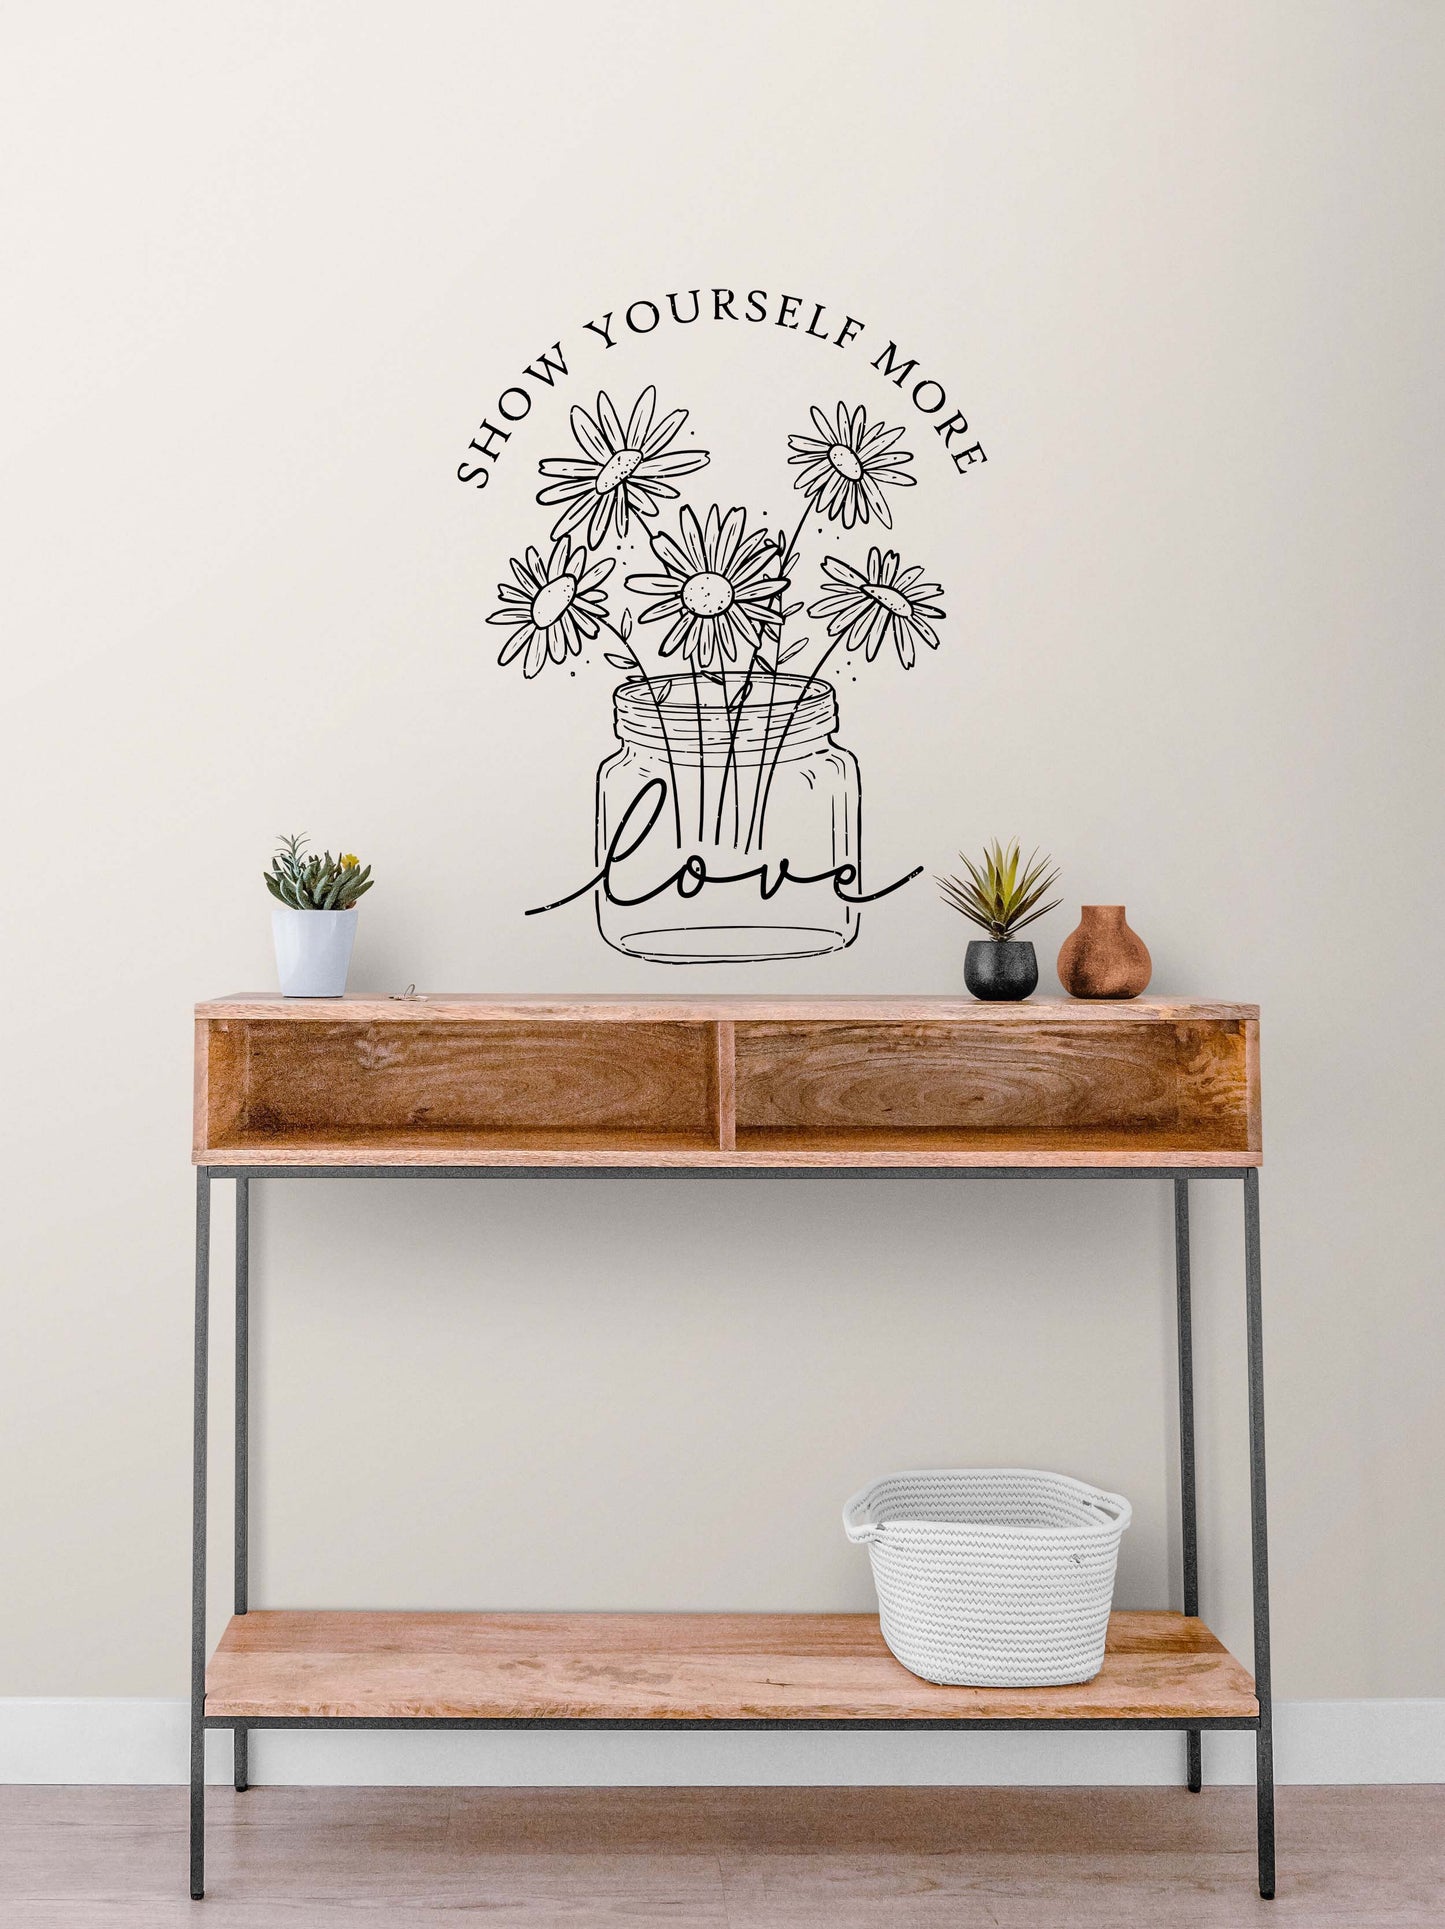 Motivational Quote, Show Yourself More Love Phrase. Affirmation, Self-Care, Self-Esteem Quote Wall Decal Sticker. #6555